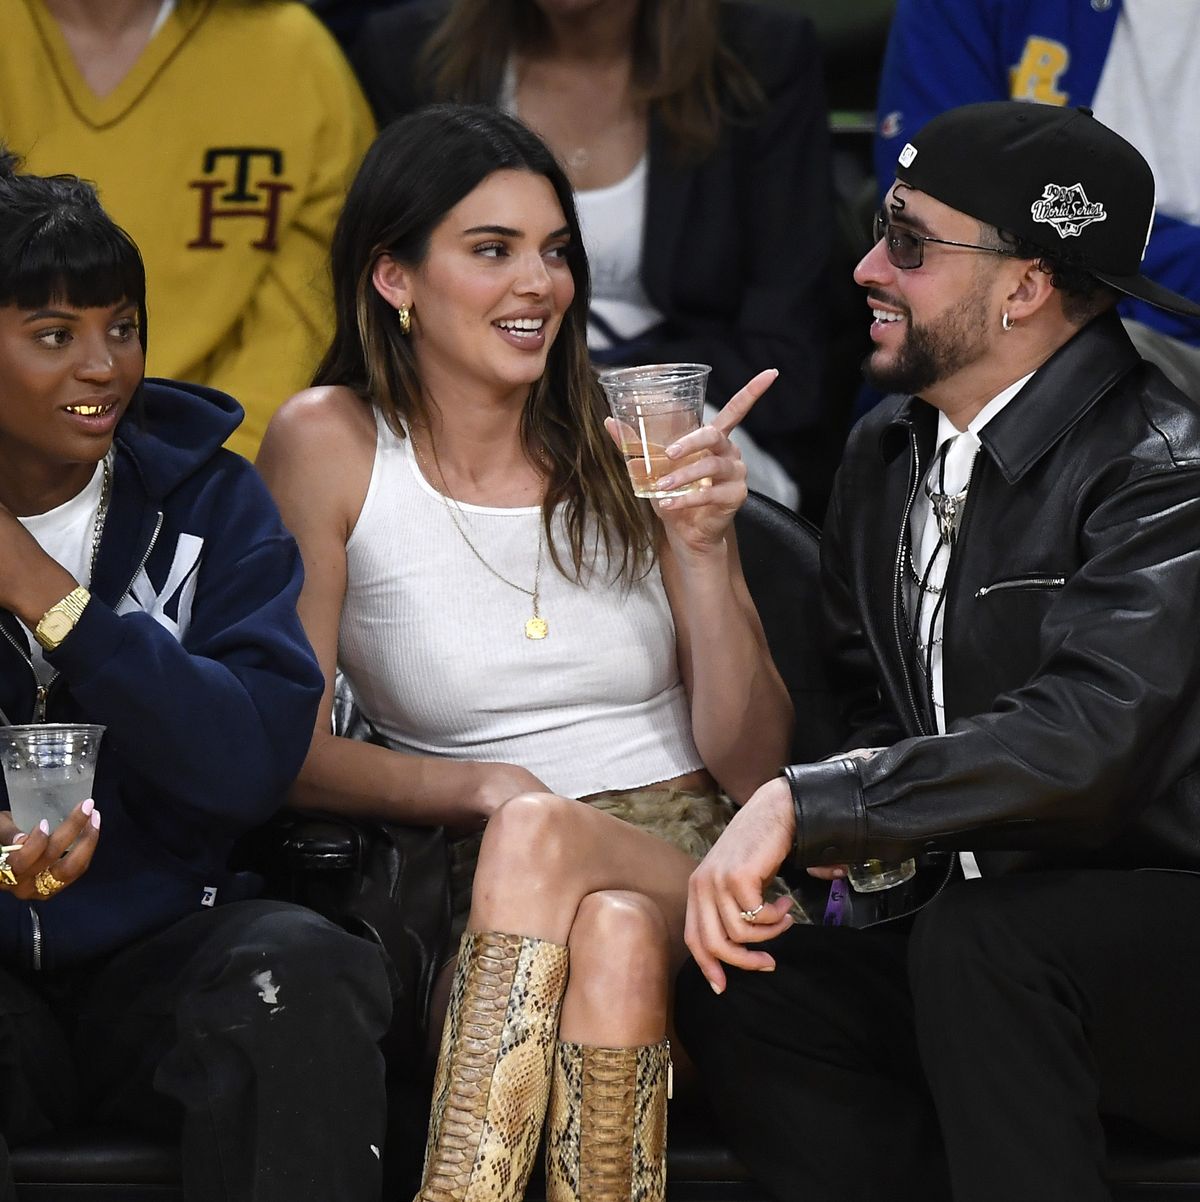 Kendall and Bad Bunny at the Lakers vs. Warriors game in Los Angeles  tonight! : r/KUWTK